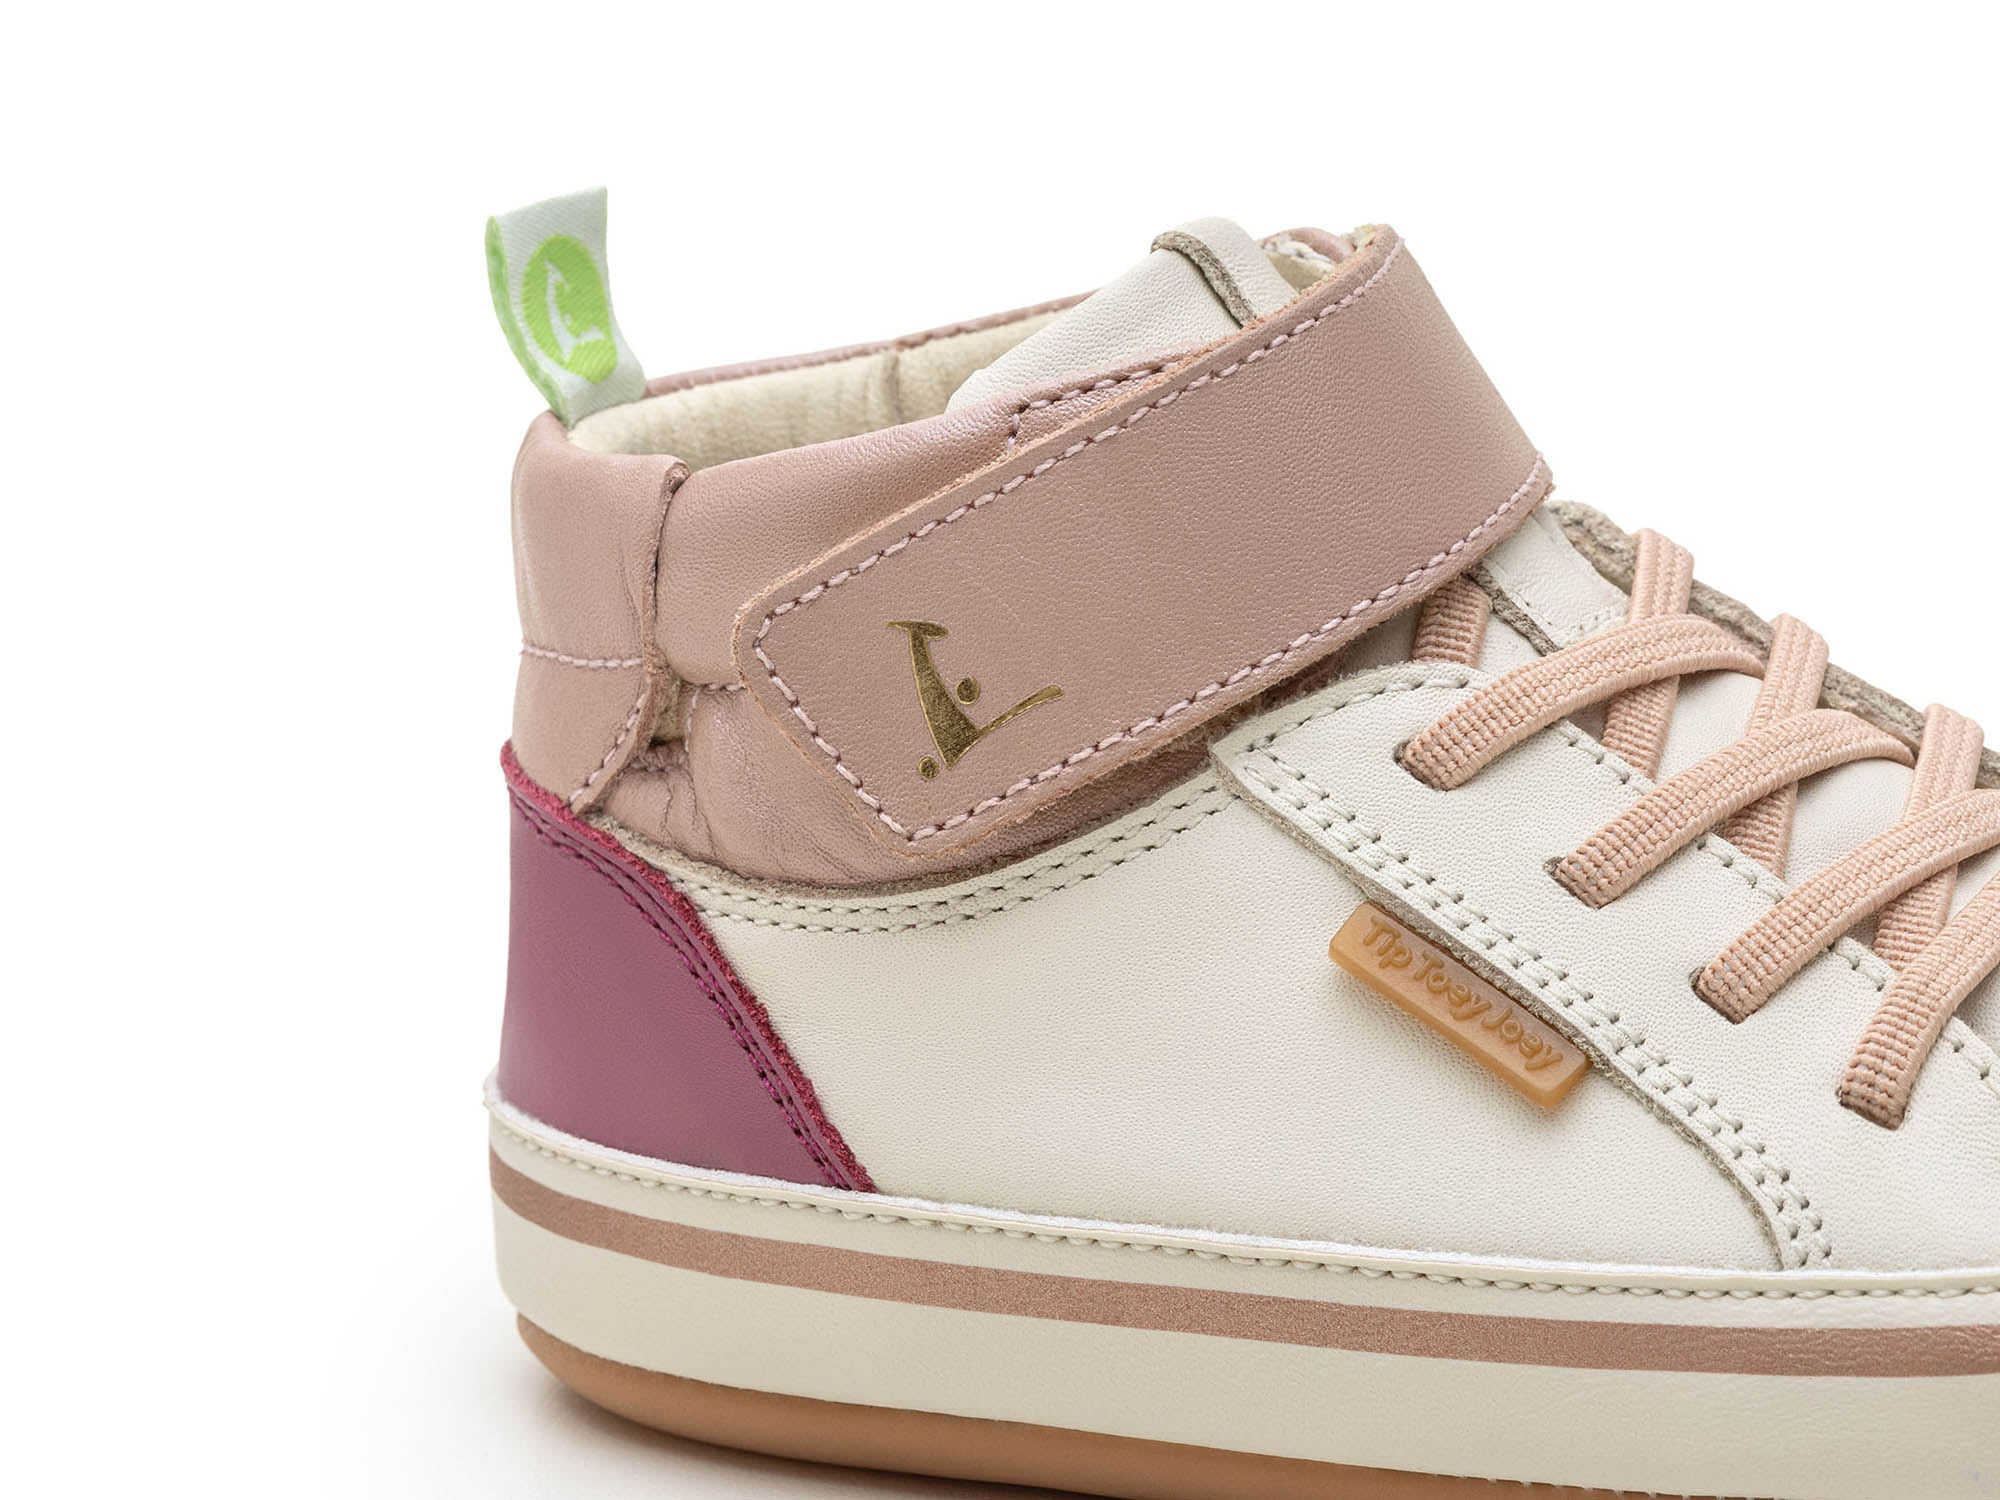 UP & GO Sneakers for Girls Alley | Tip Toey Joey - Australia - 5